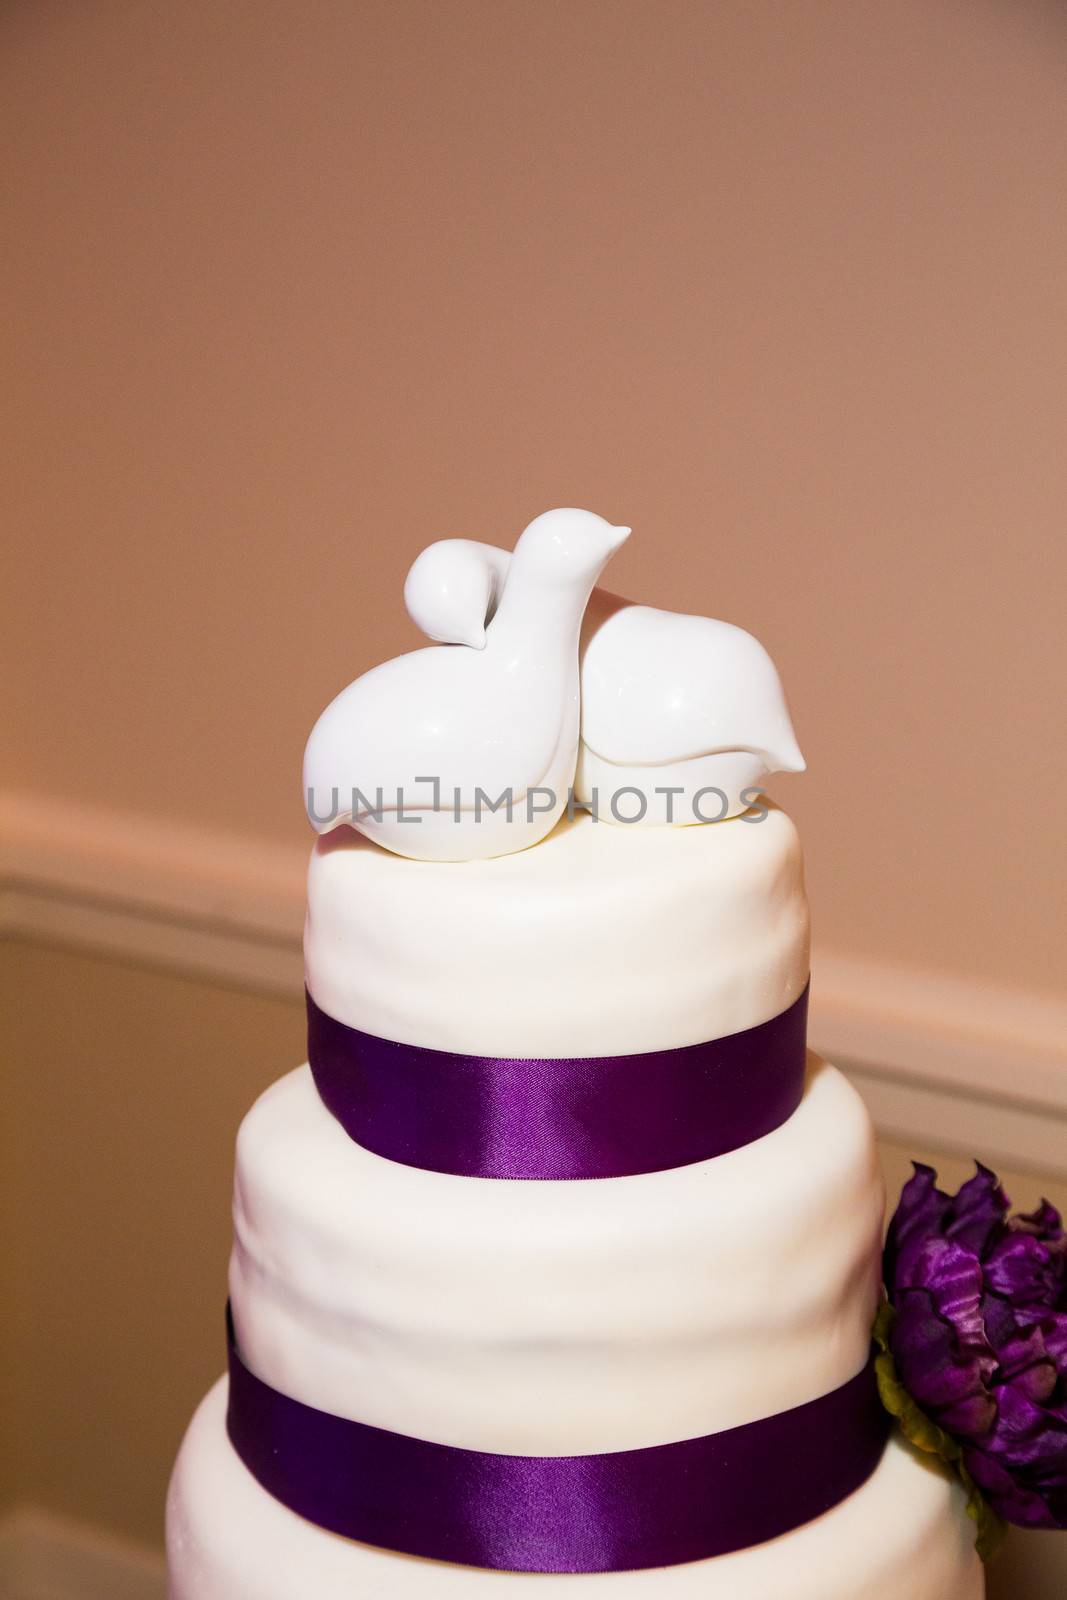 This ceramic cake topper has two love birds on it in all white.